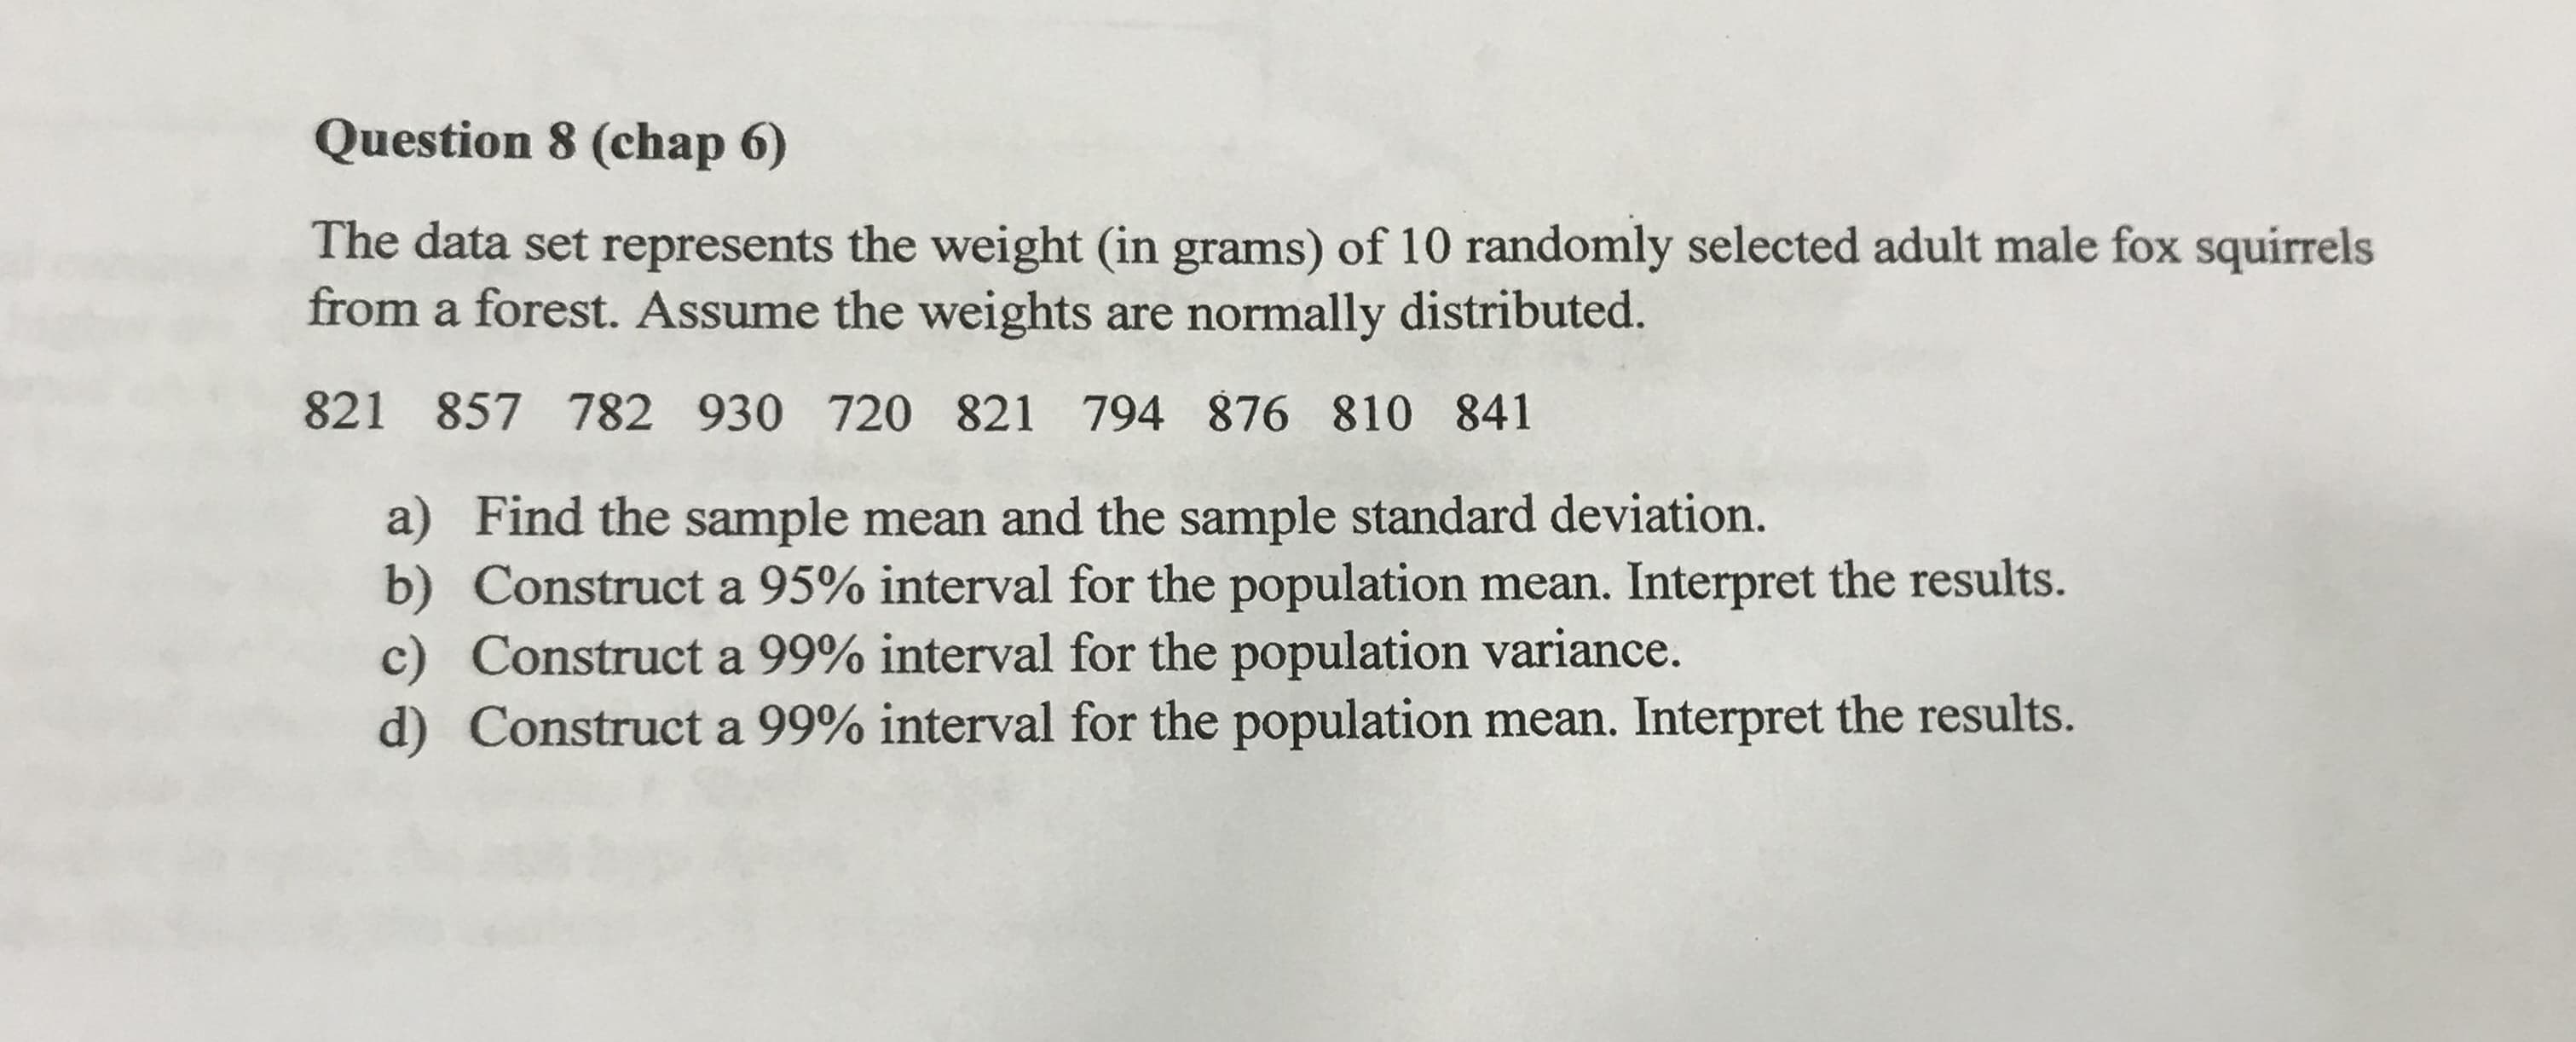 The data set represents the weight (in grams) of 10 randomly selected adult male fox squirrels
from a forest. Assume the weights are normally distributed.
821 857 782 930 720 821 794 876 810 841
a) Find the sample mean and the sample standard deviation.
b) Construct a 95% interval for the population mean. Interpret the results.
c) Construct a 99% interval for the population variance.
d) Construct a 99% interval for the population mean. Interpret the results.
